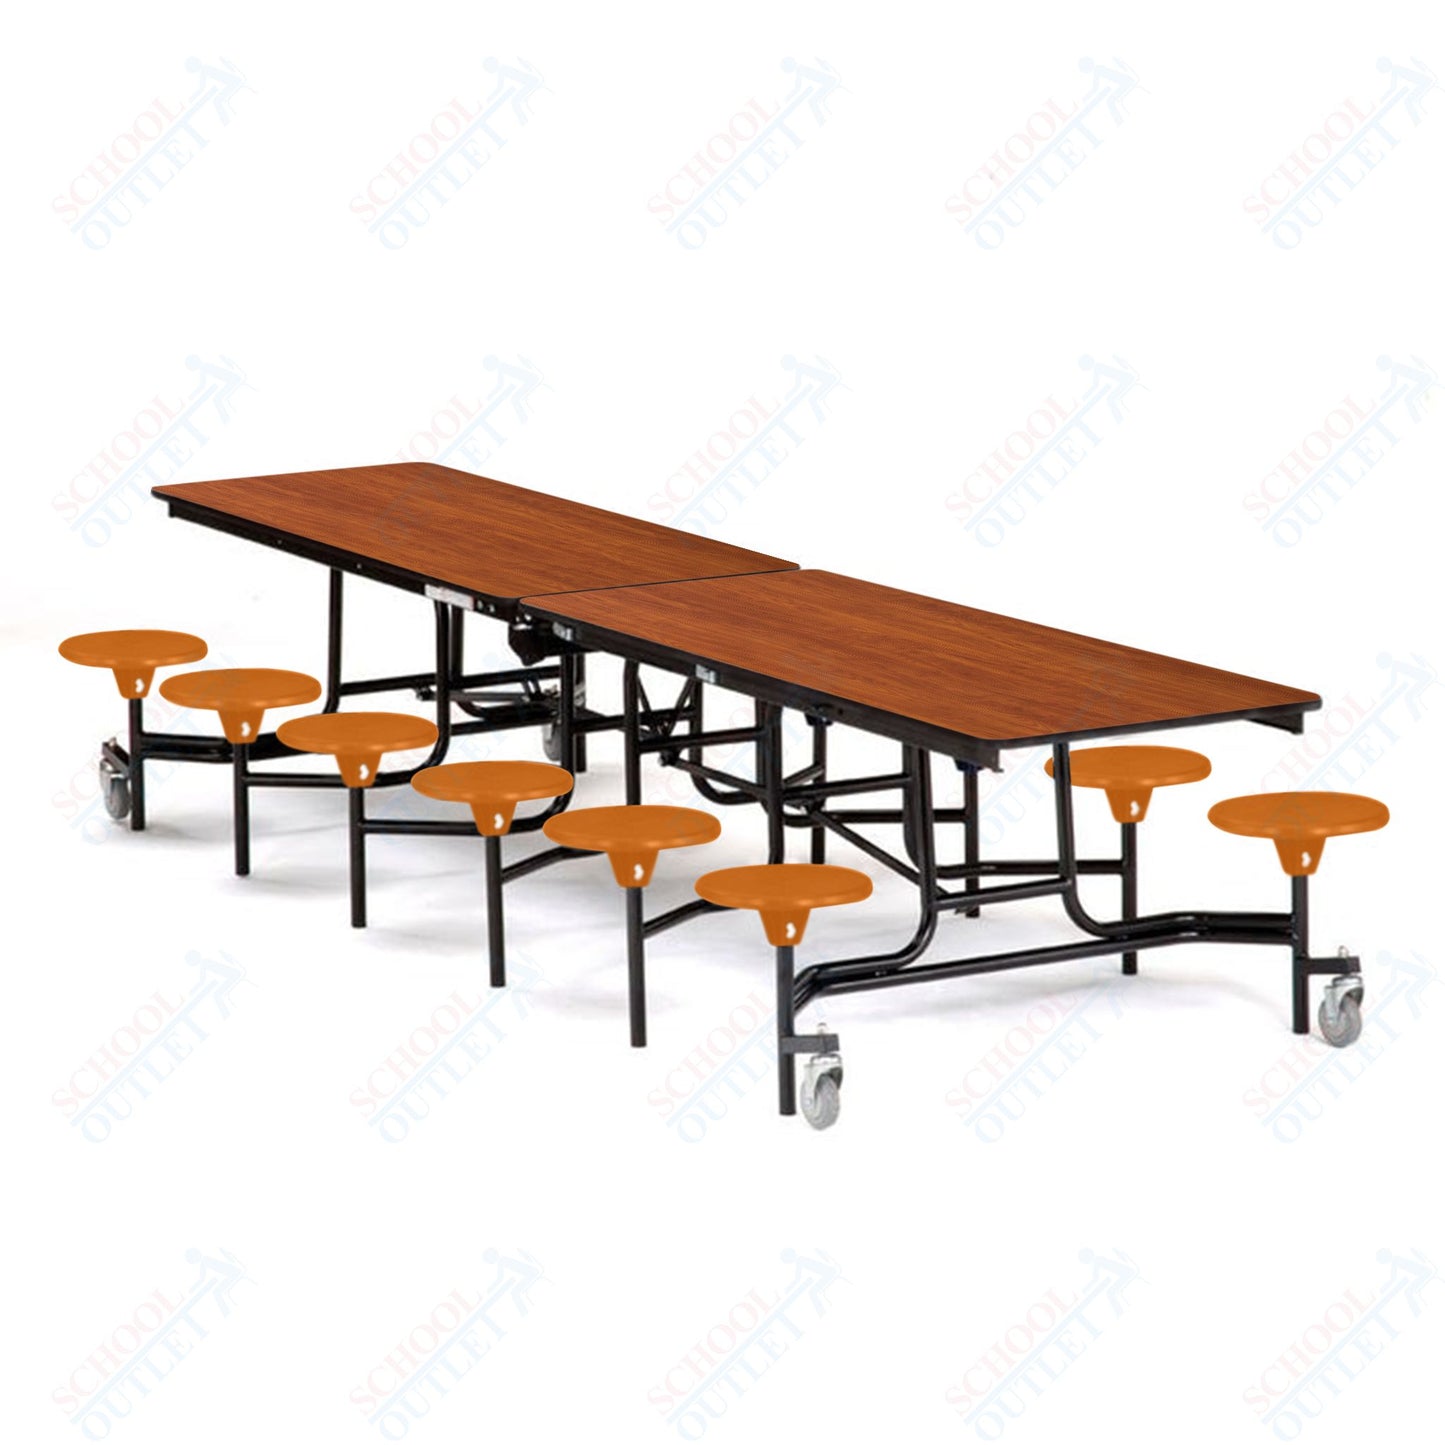 Mobile Cafeteria Lunchroom Stool Table - 30" W x 12' L - 12 Stools - Plywood Core - Protect Edge - Chrome Frame